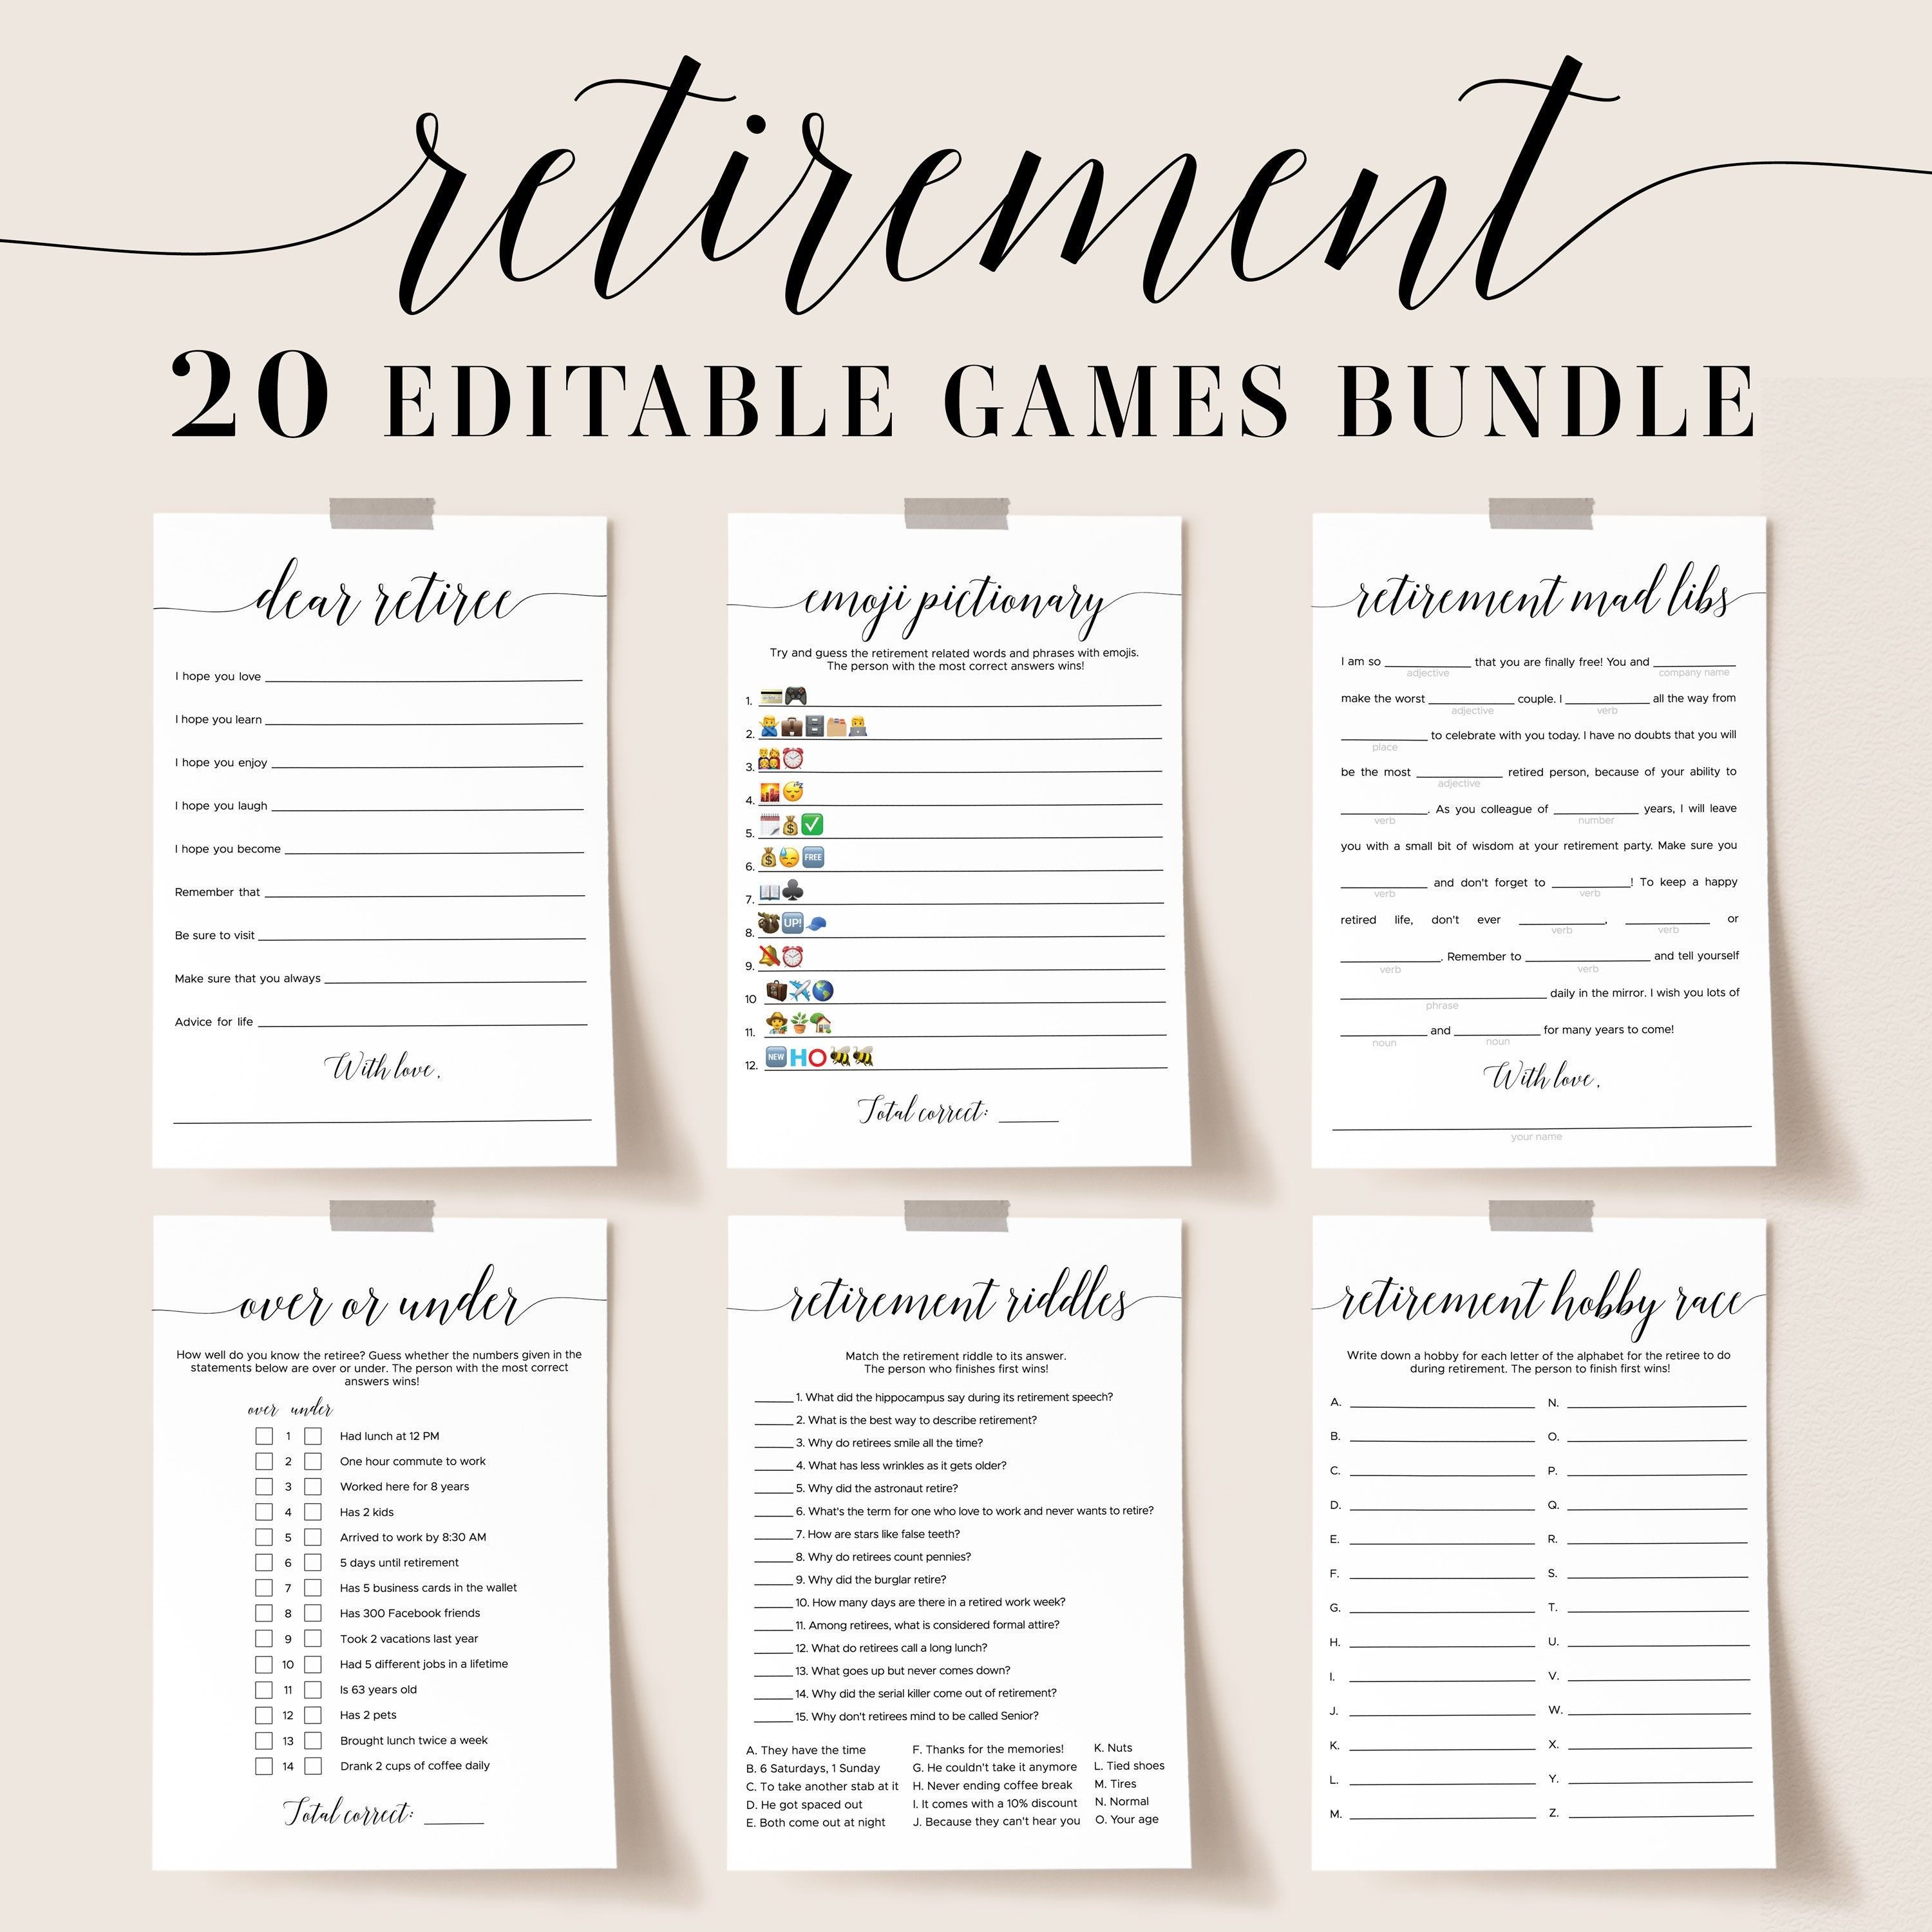 Retirement games printable retiree party activities for office workplace ideas editable cards family feâ goodbye party retirement parties how to memorize things